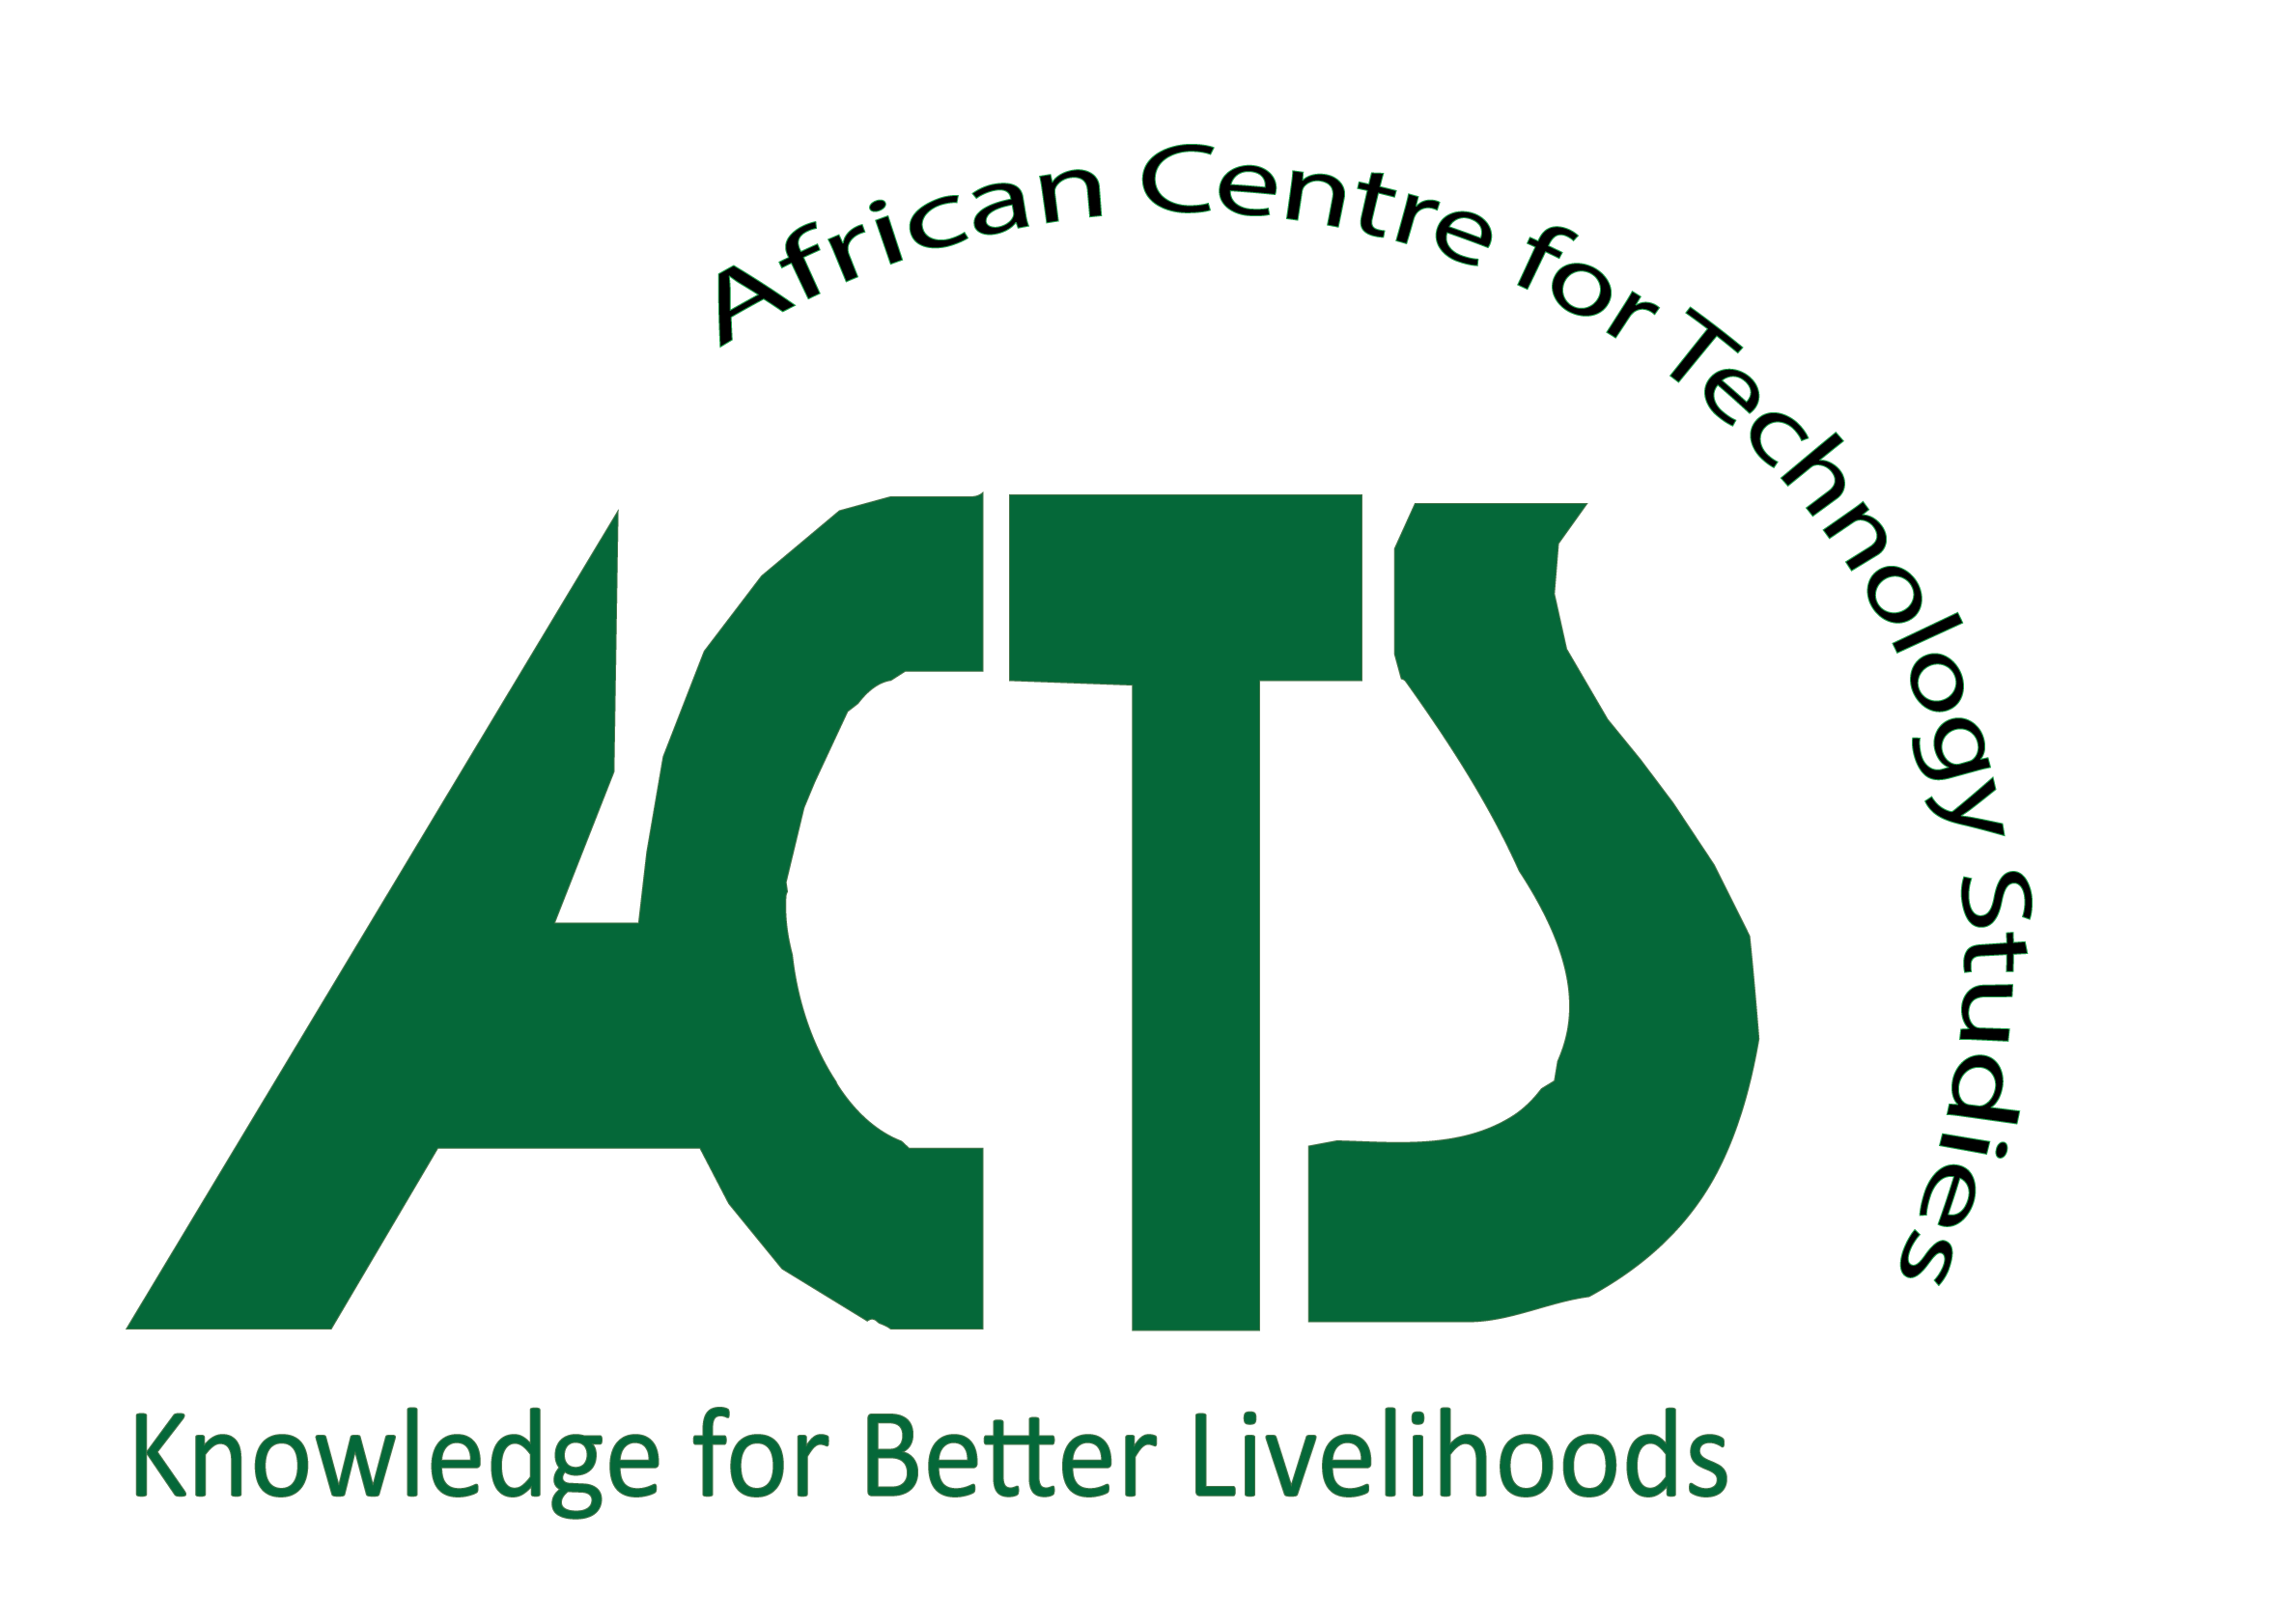 African Centre for Technology Studies (ACTS)